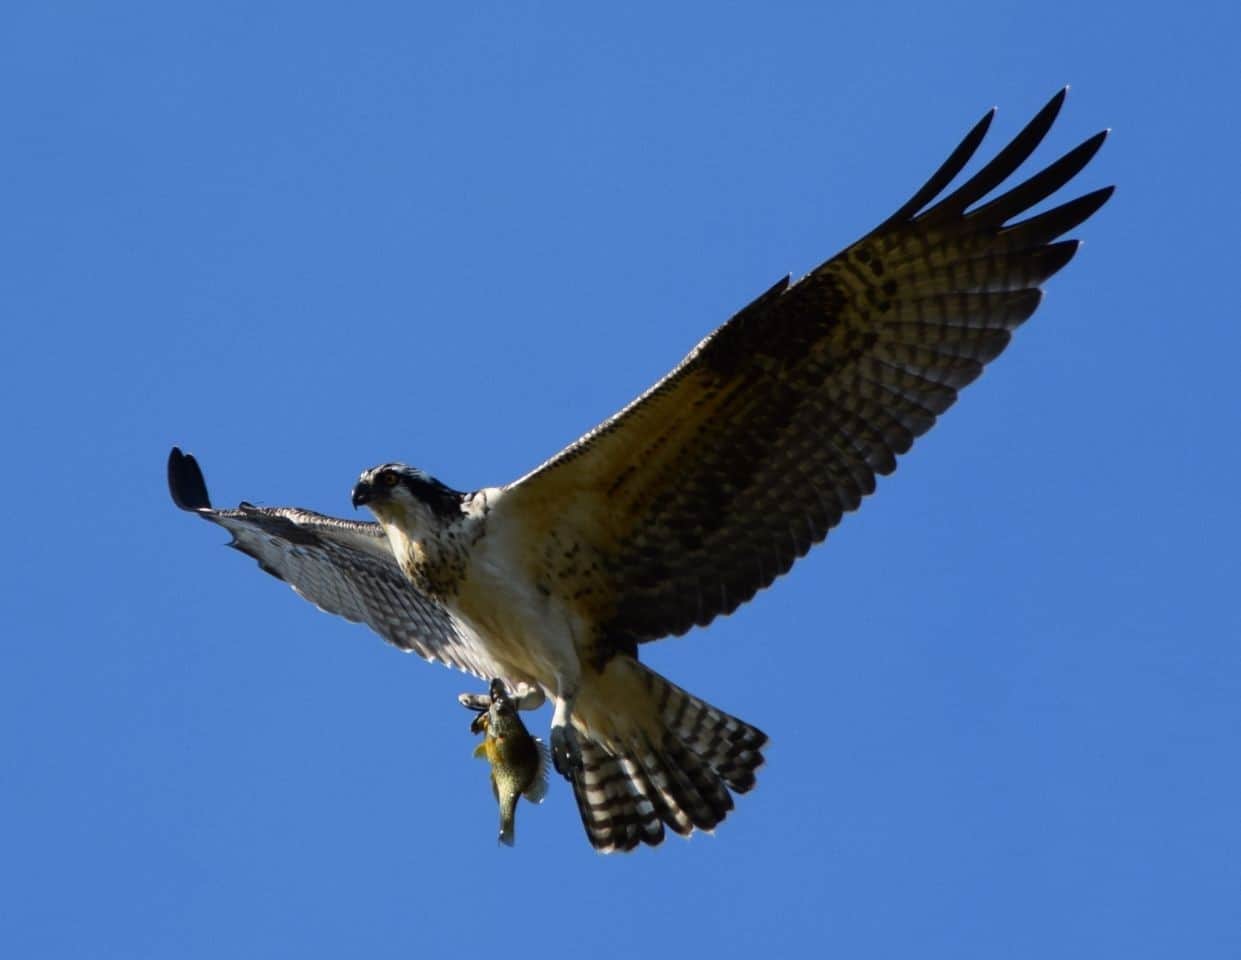 Kootenay Lake hosts one of the highest densities of nesting Osprey in BC, Canada, making the Nelson Waterfront Trail in Nelson, BC is a birding hotspot along the Trans Canada Trail.